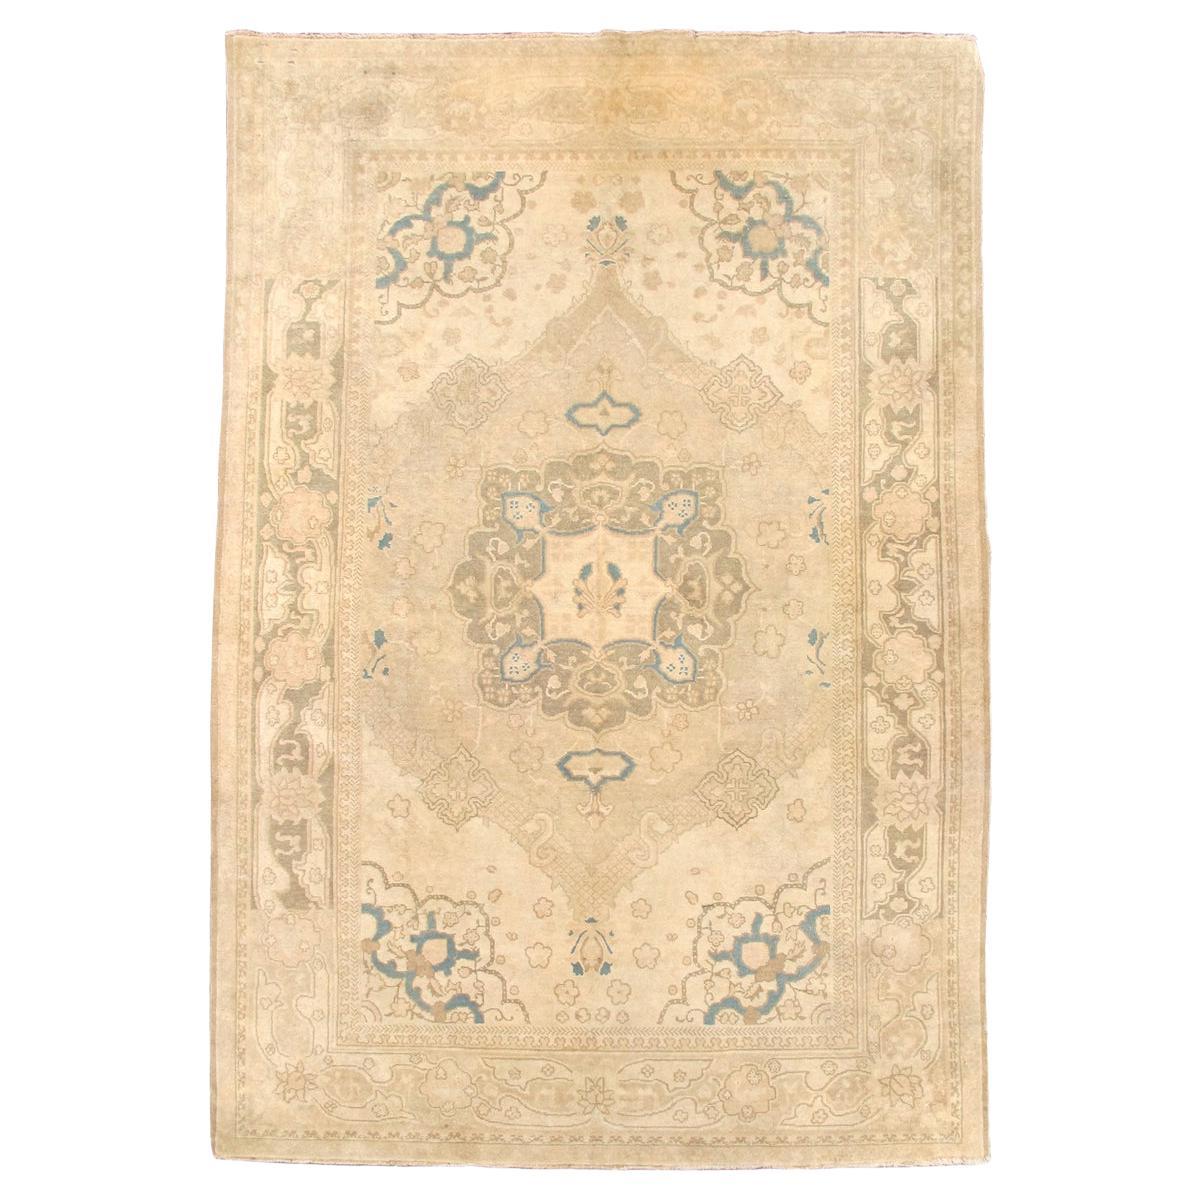 Antique Indian Rug, Late 19th Century